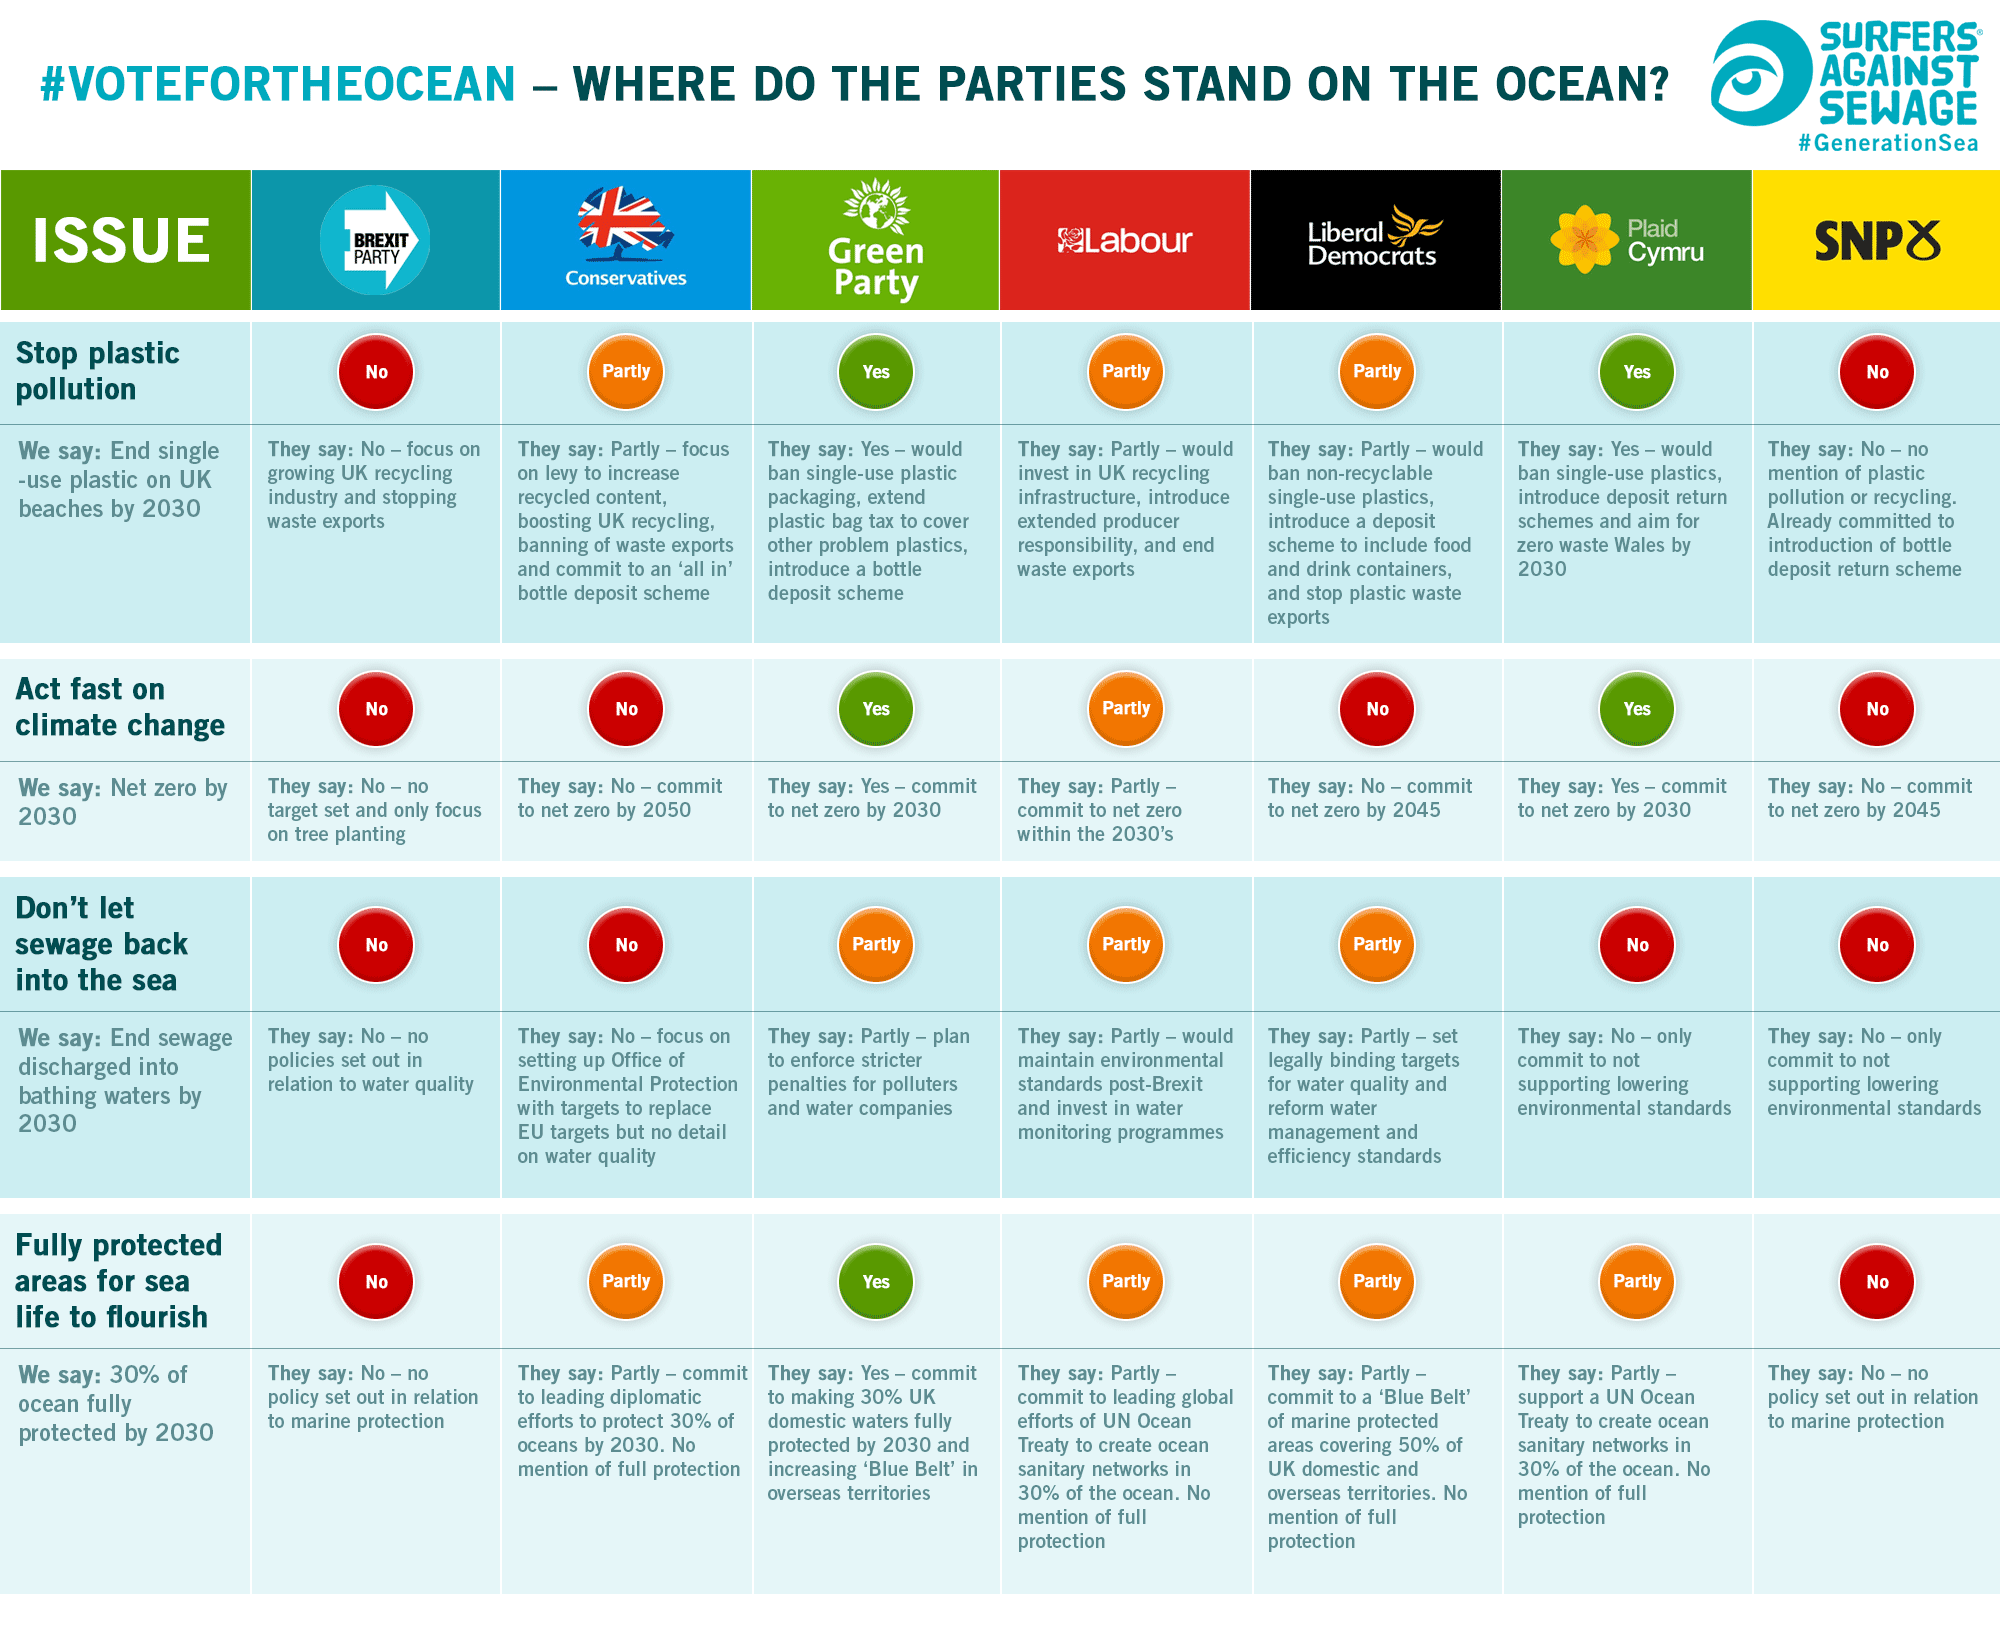 Party promises on the ocean and climate